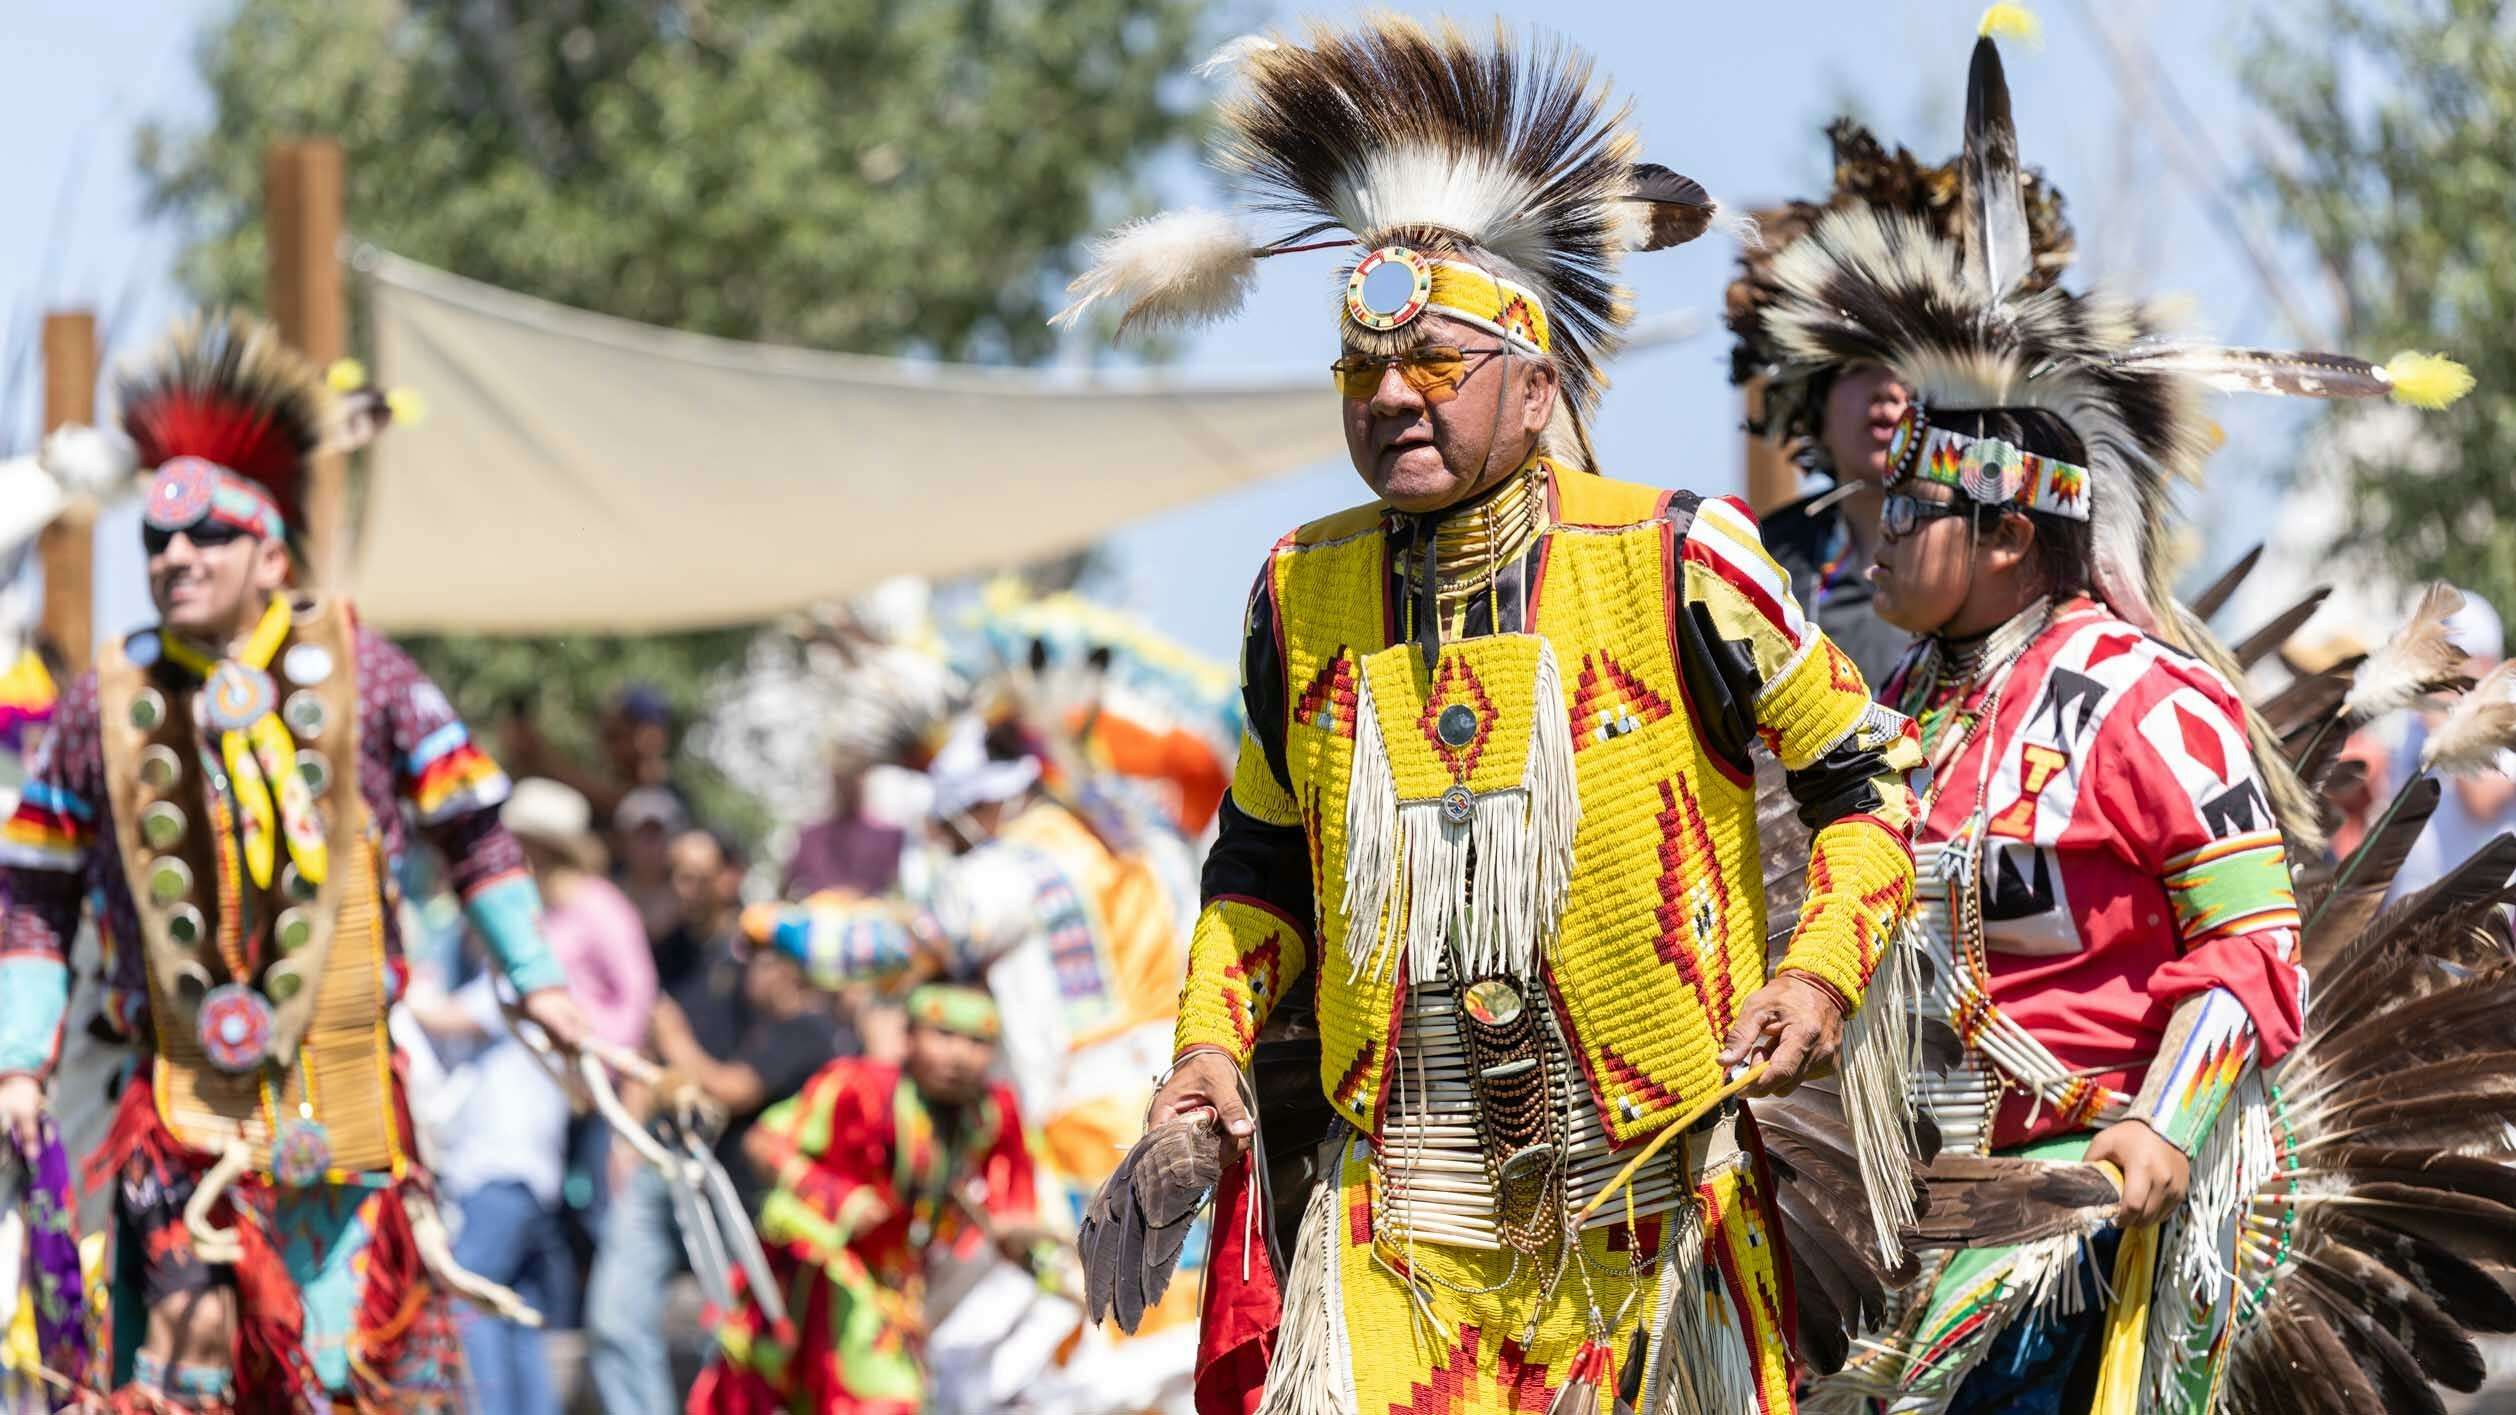 Caption for photo below — Pat Iron Cloud for the Wind River Reservations performs at the Native American Indian Village during Cheyenne Frontier Days on July 22, 2023.